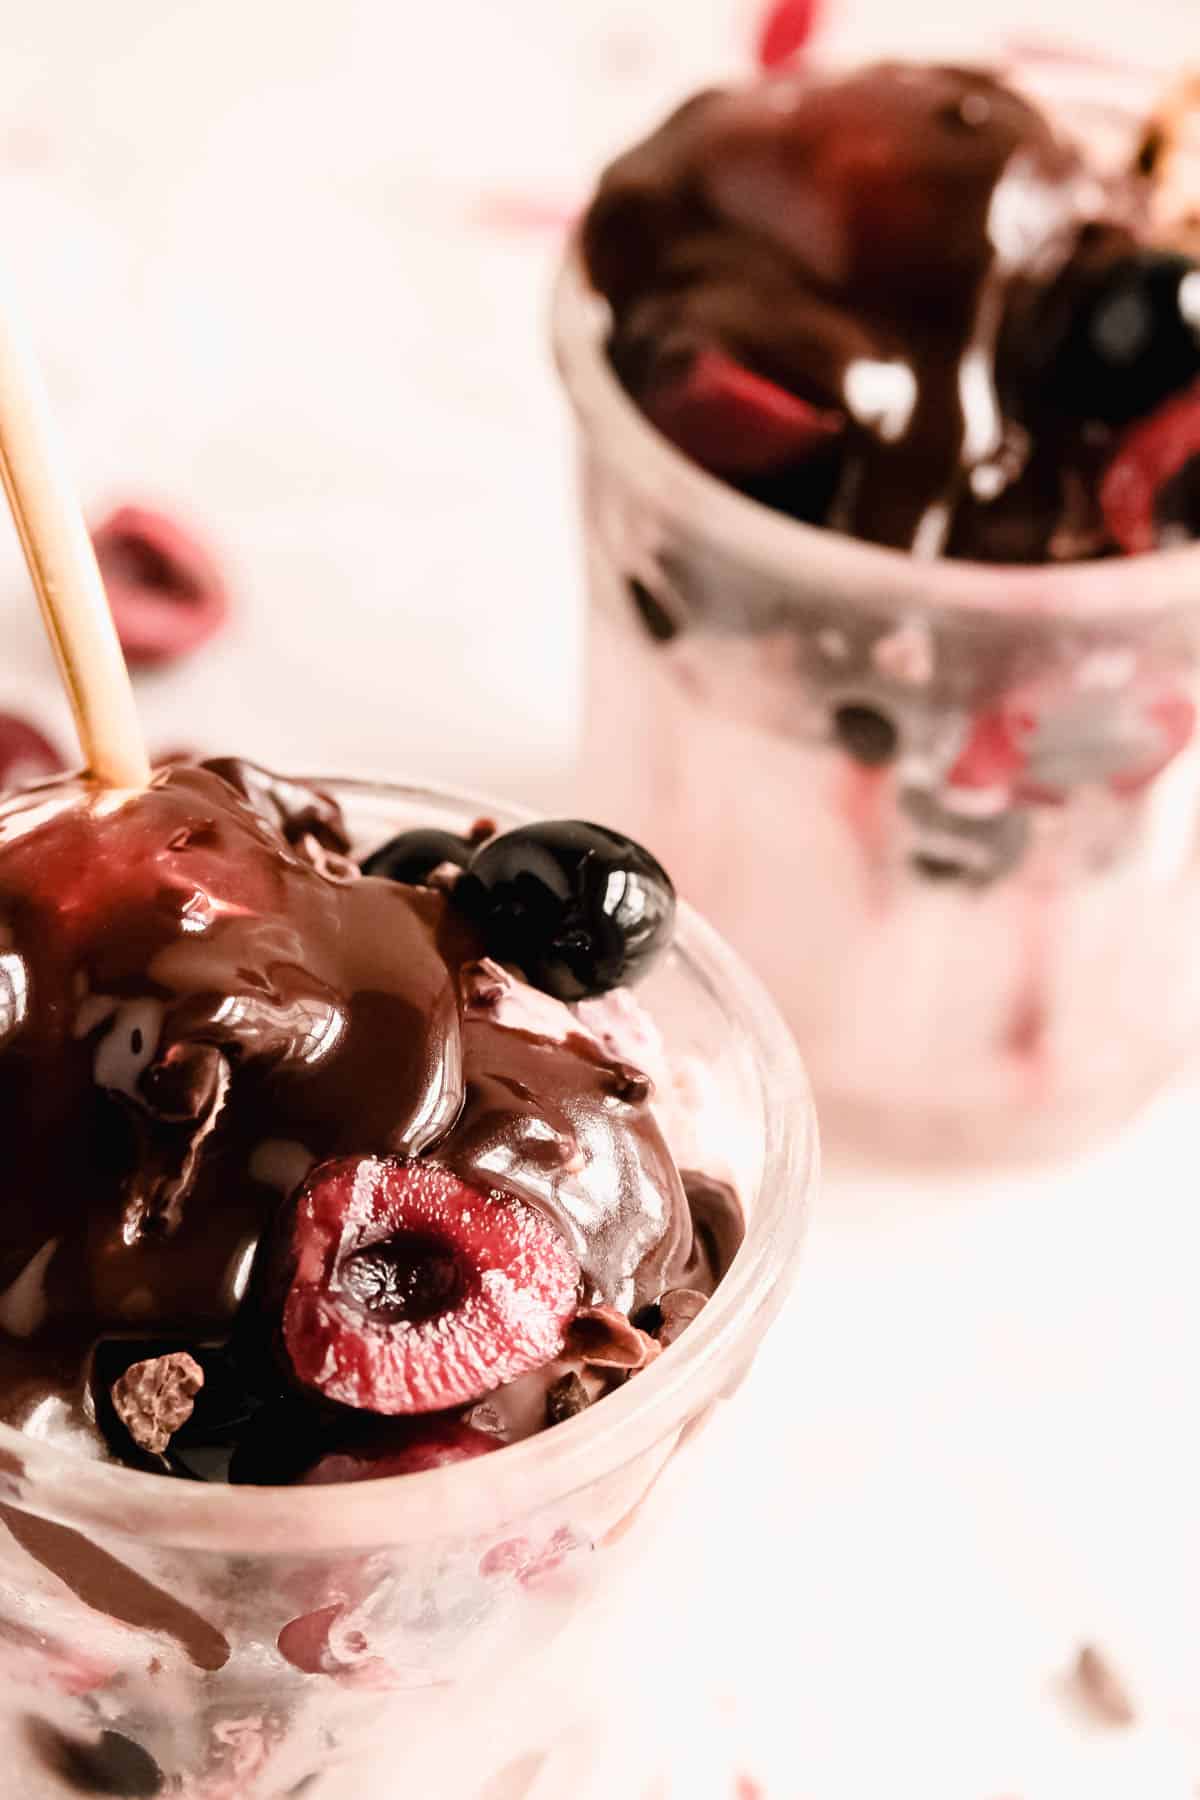 cherry ice cream and sundaes in glass jars close-up with homemade fudge sauce on top.